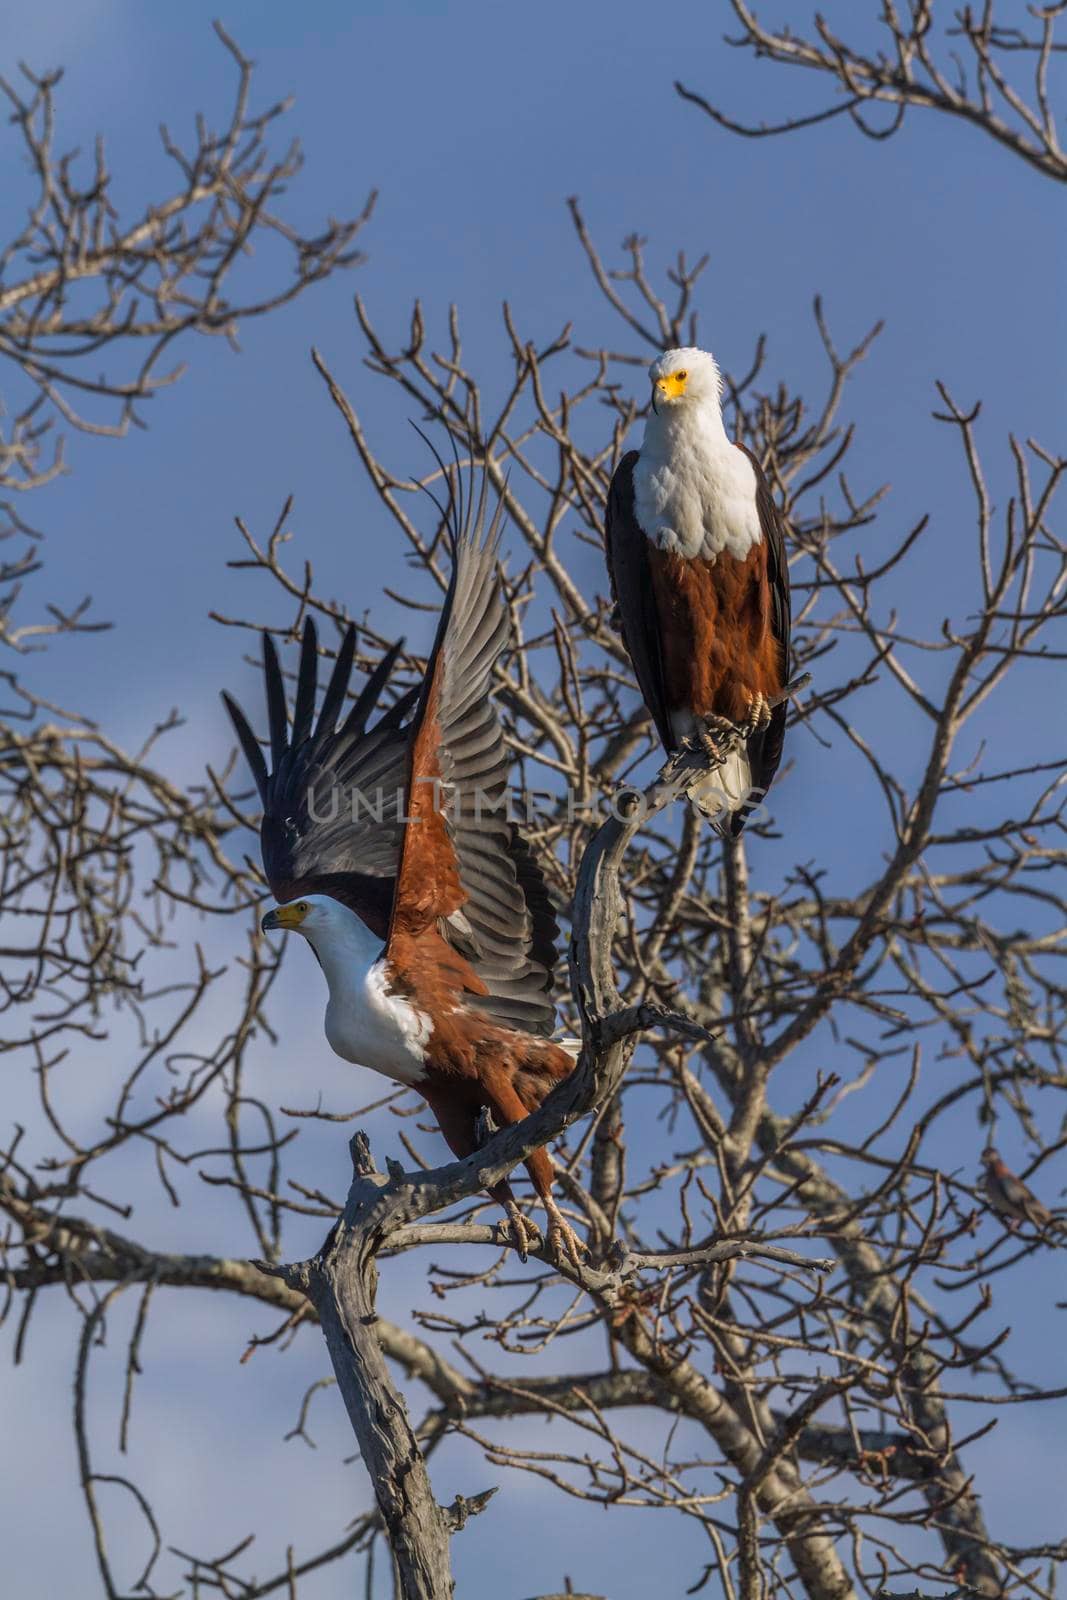 African fish eagle in Kruger National park, South Africa ; Specie Haliaeetus vocifer family of Accipitridae